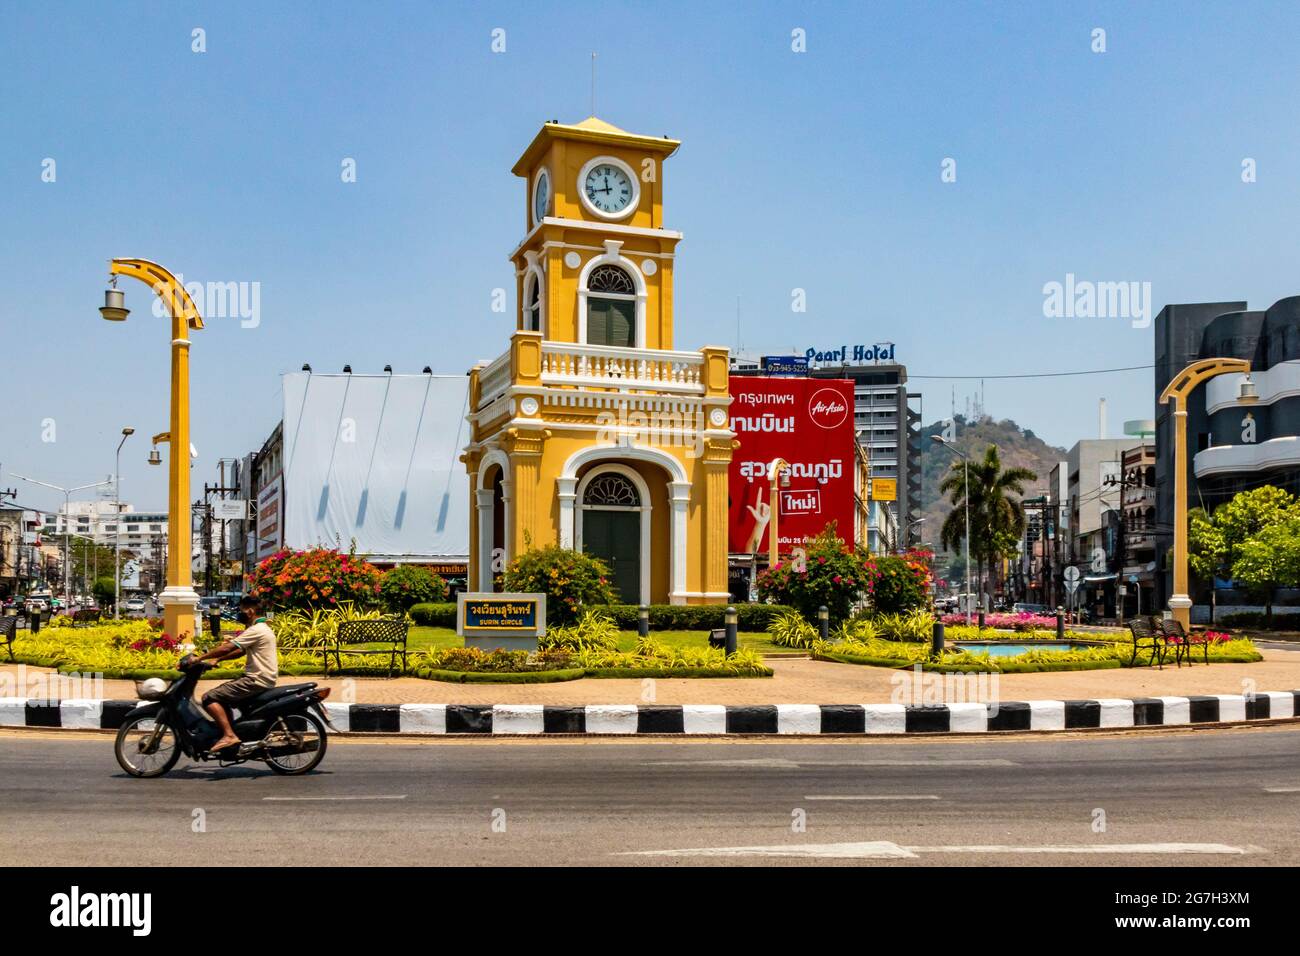 The clock tower roundabout in Phuket Town, Thailand Stock Photo